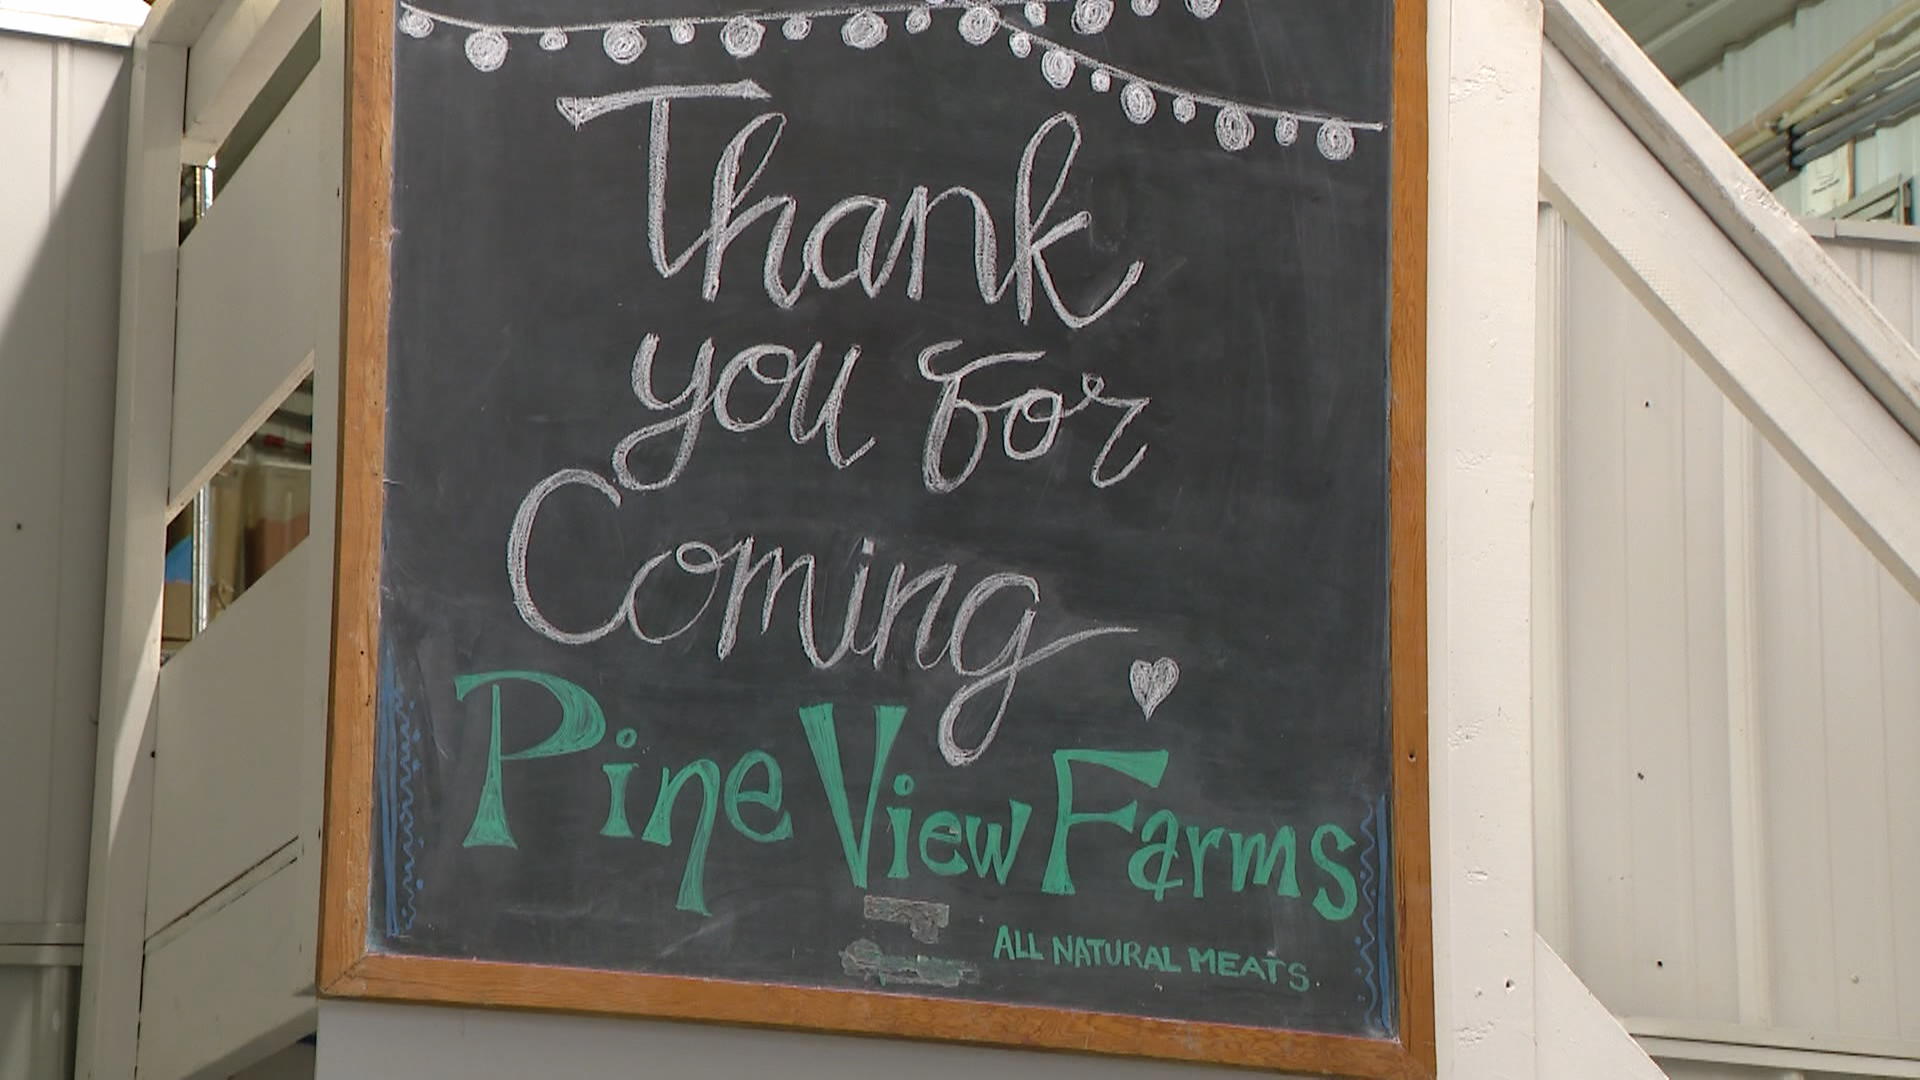 After 26 years, Sask.’s Pineview Farms closes shop and looks to the
future